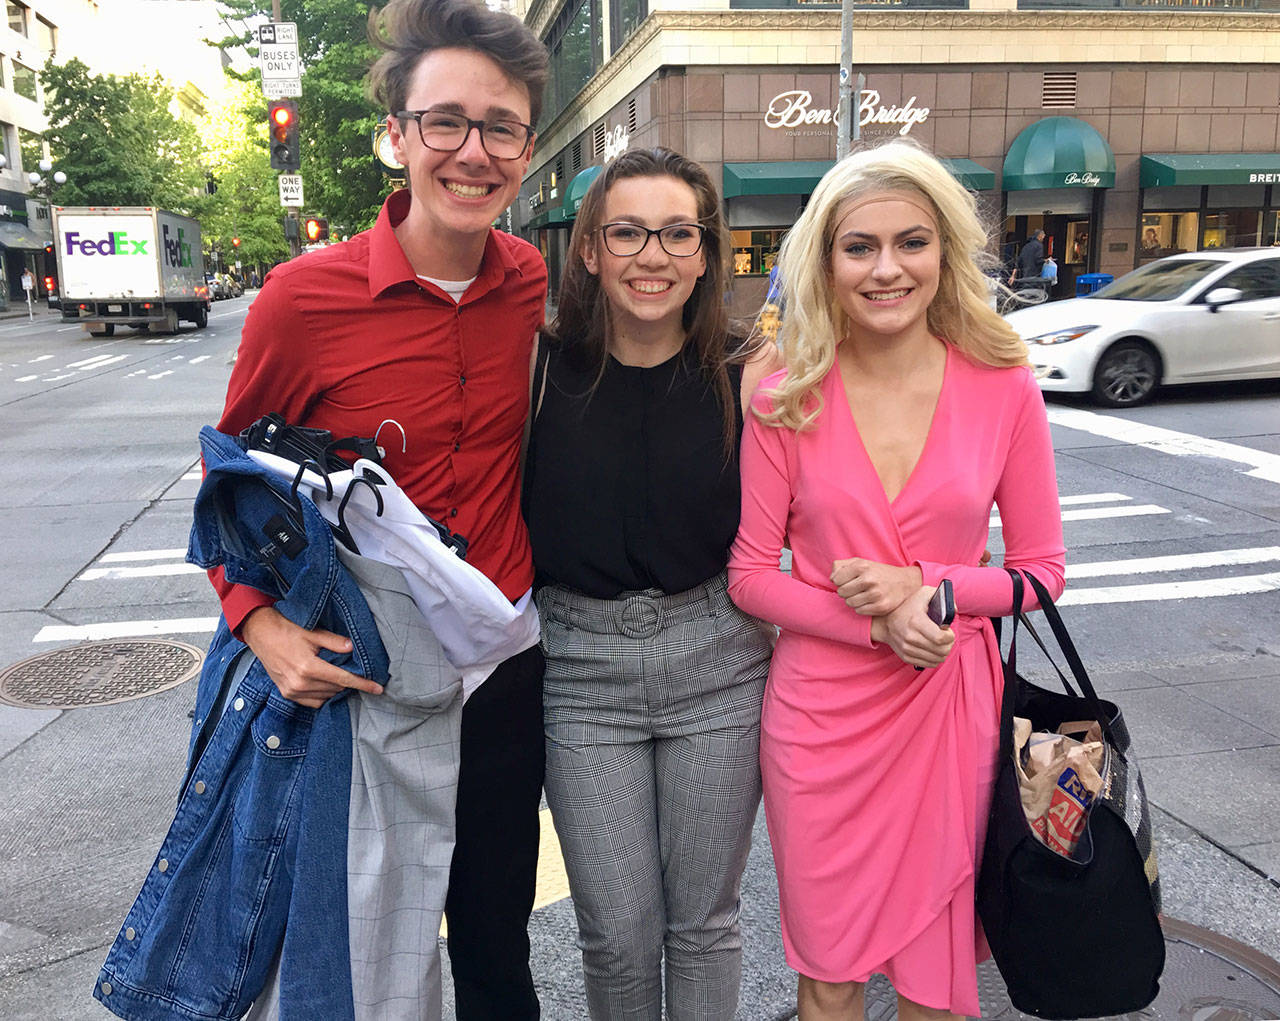 For The 5th Avenue Theatre Awards, Sequim High students and actors for “Legally Blonde,” from left, Damon Little, Maggie van Dyken, and Maddy Dietzman performed on June 3 during the show. Sequim’s operetta received five nominations. Photo courtesy of Linda Dowdell